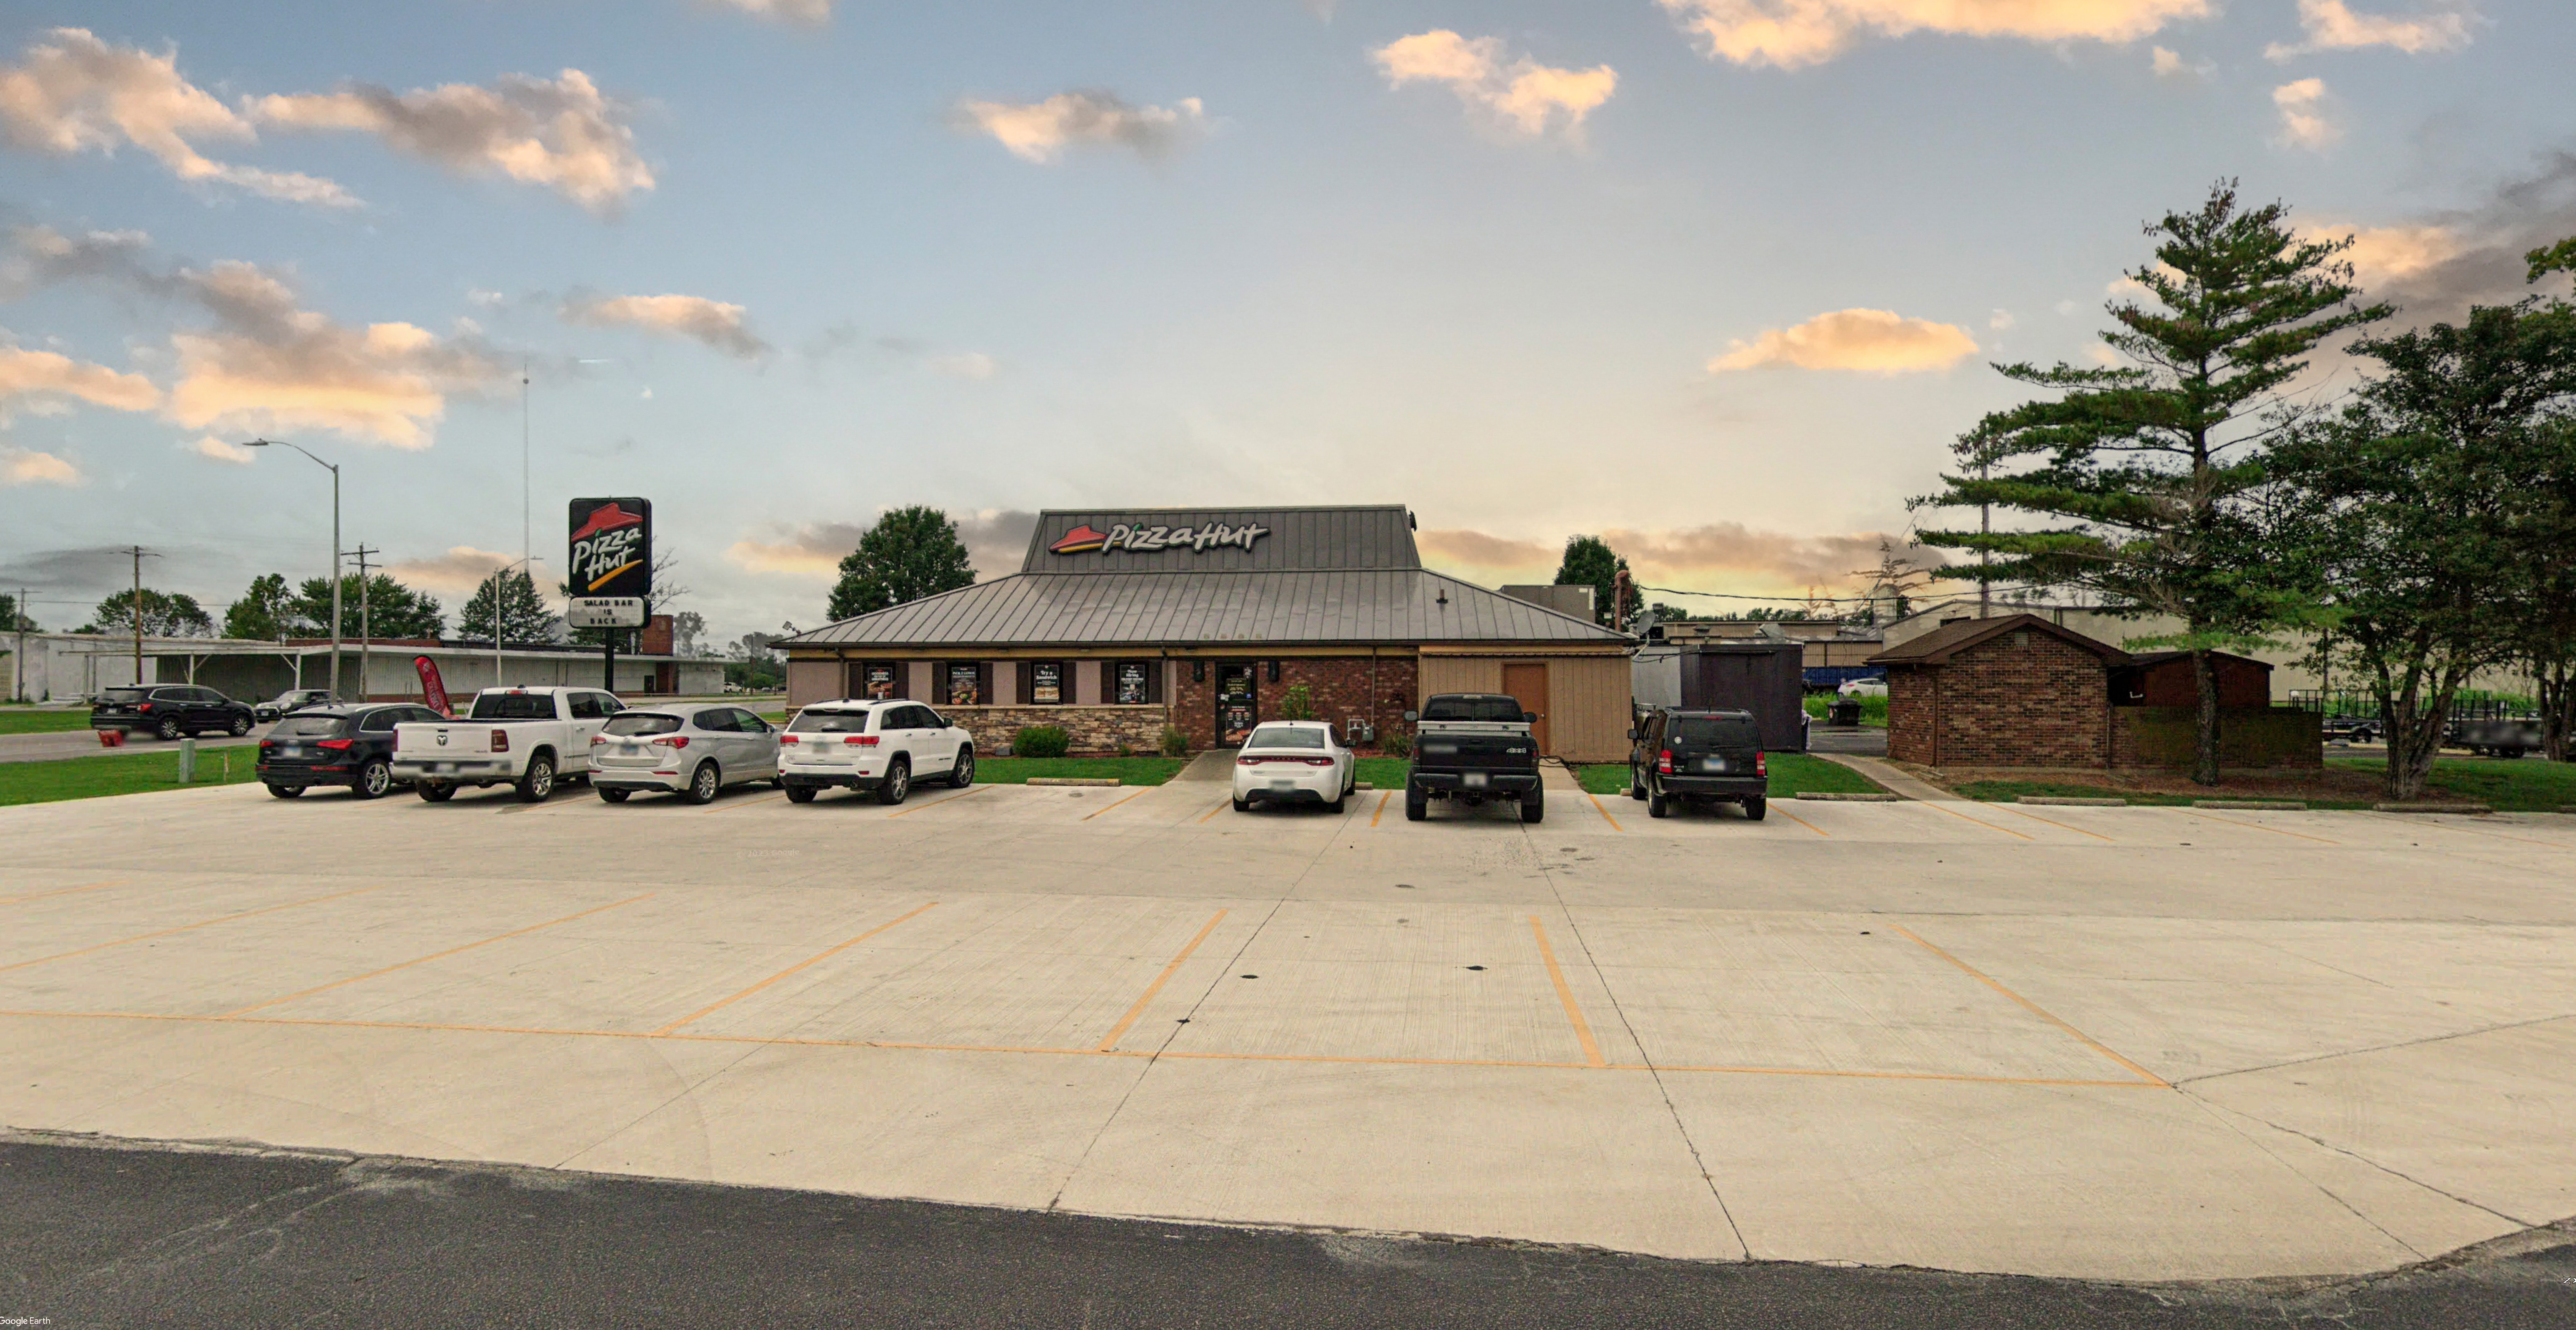 Pizza Hut Grey Brick Building with Parking lot